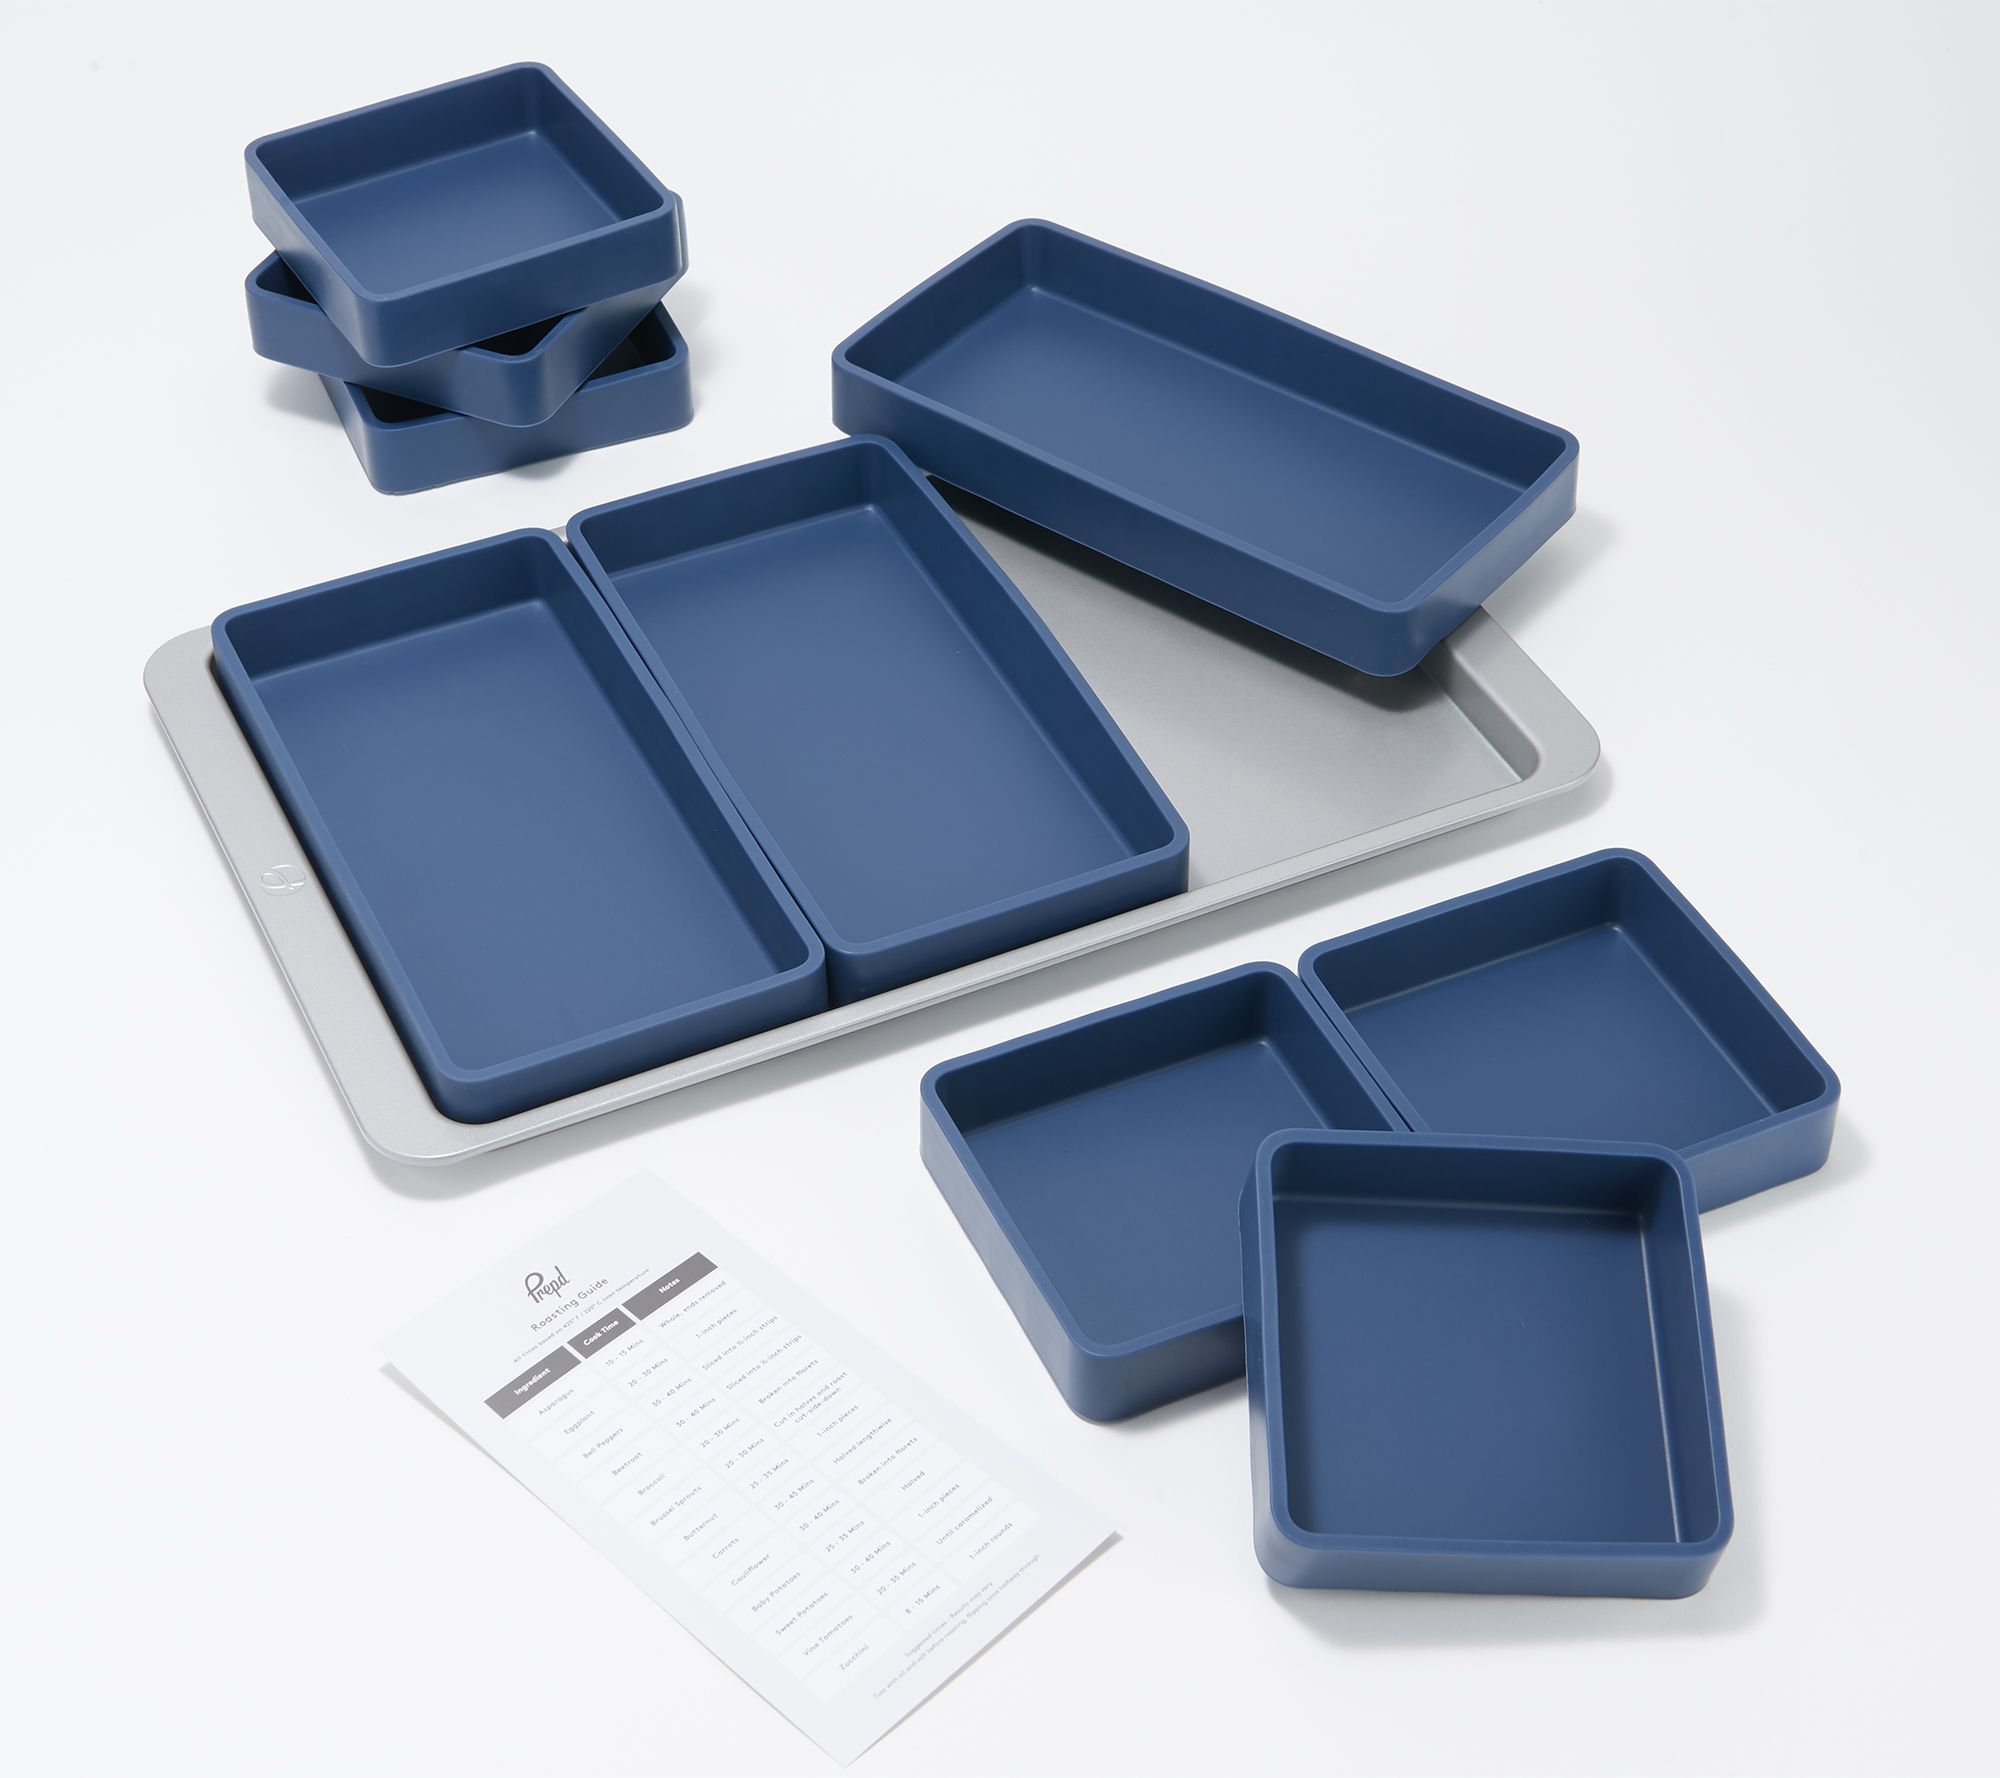 Cheat Sheets Silicone Baking Trays, Set of 4